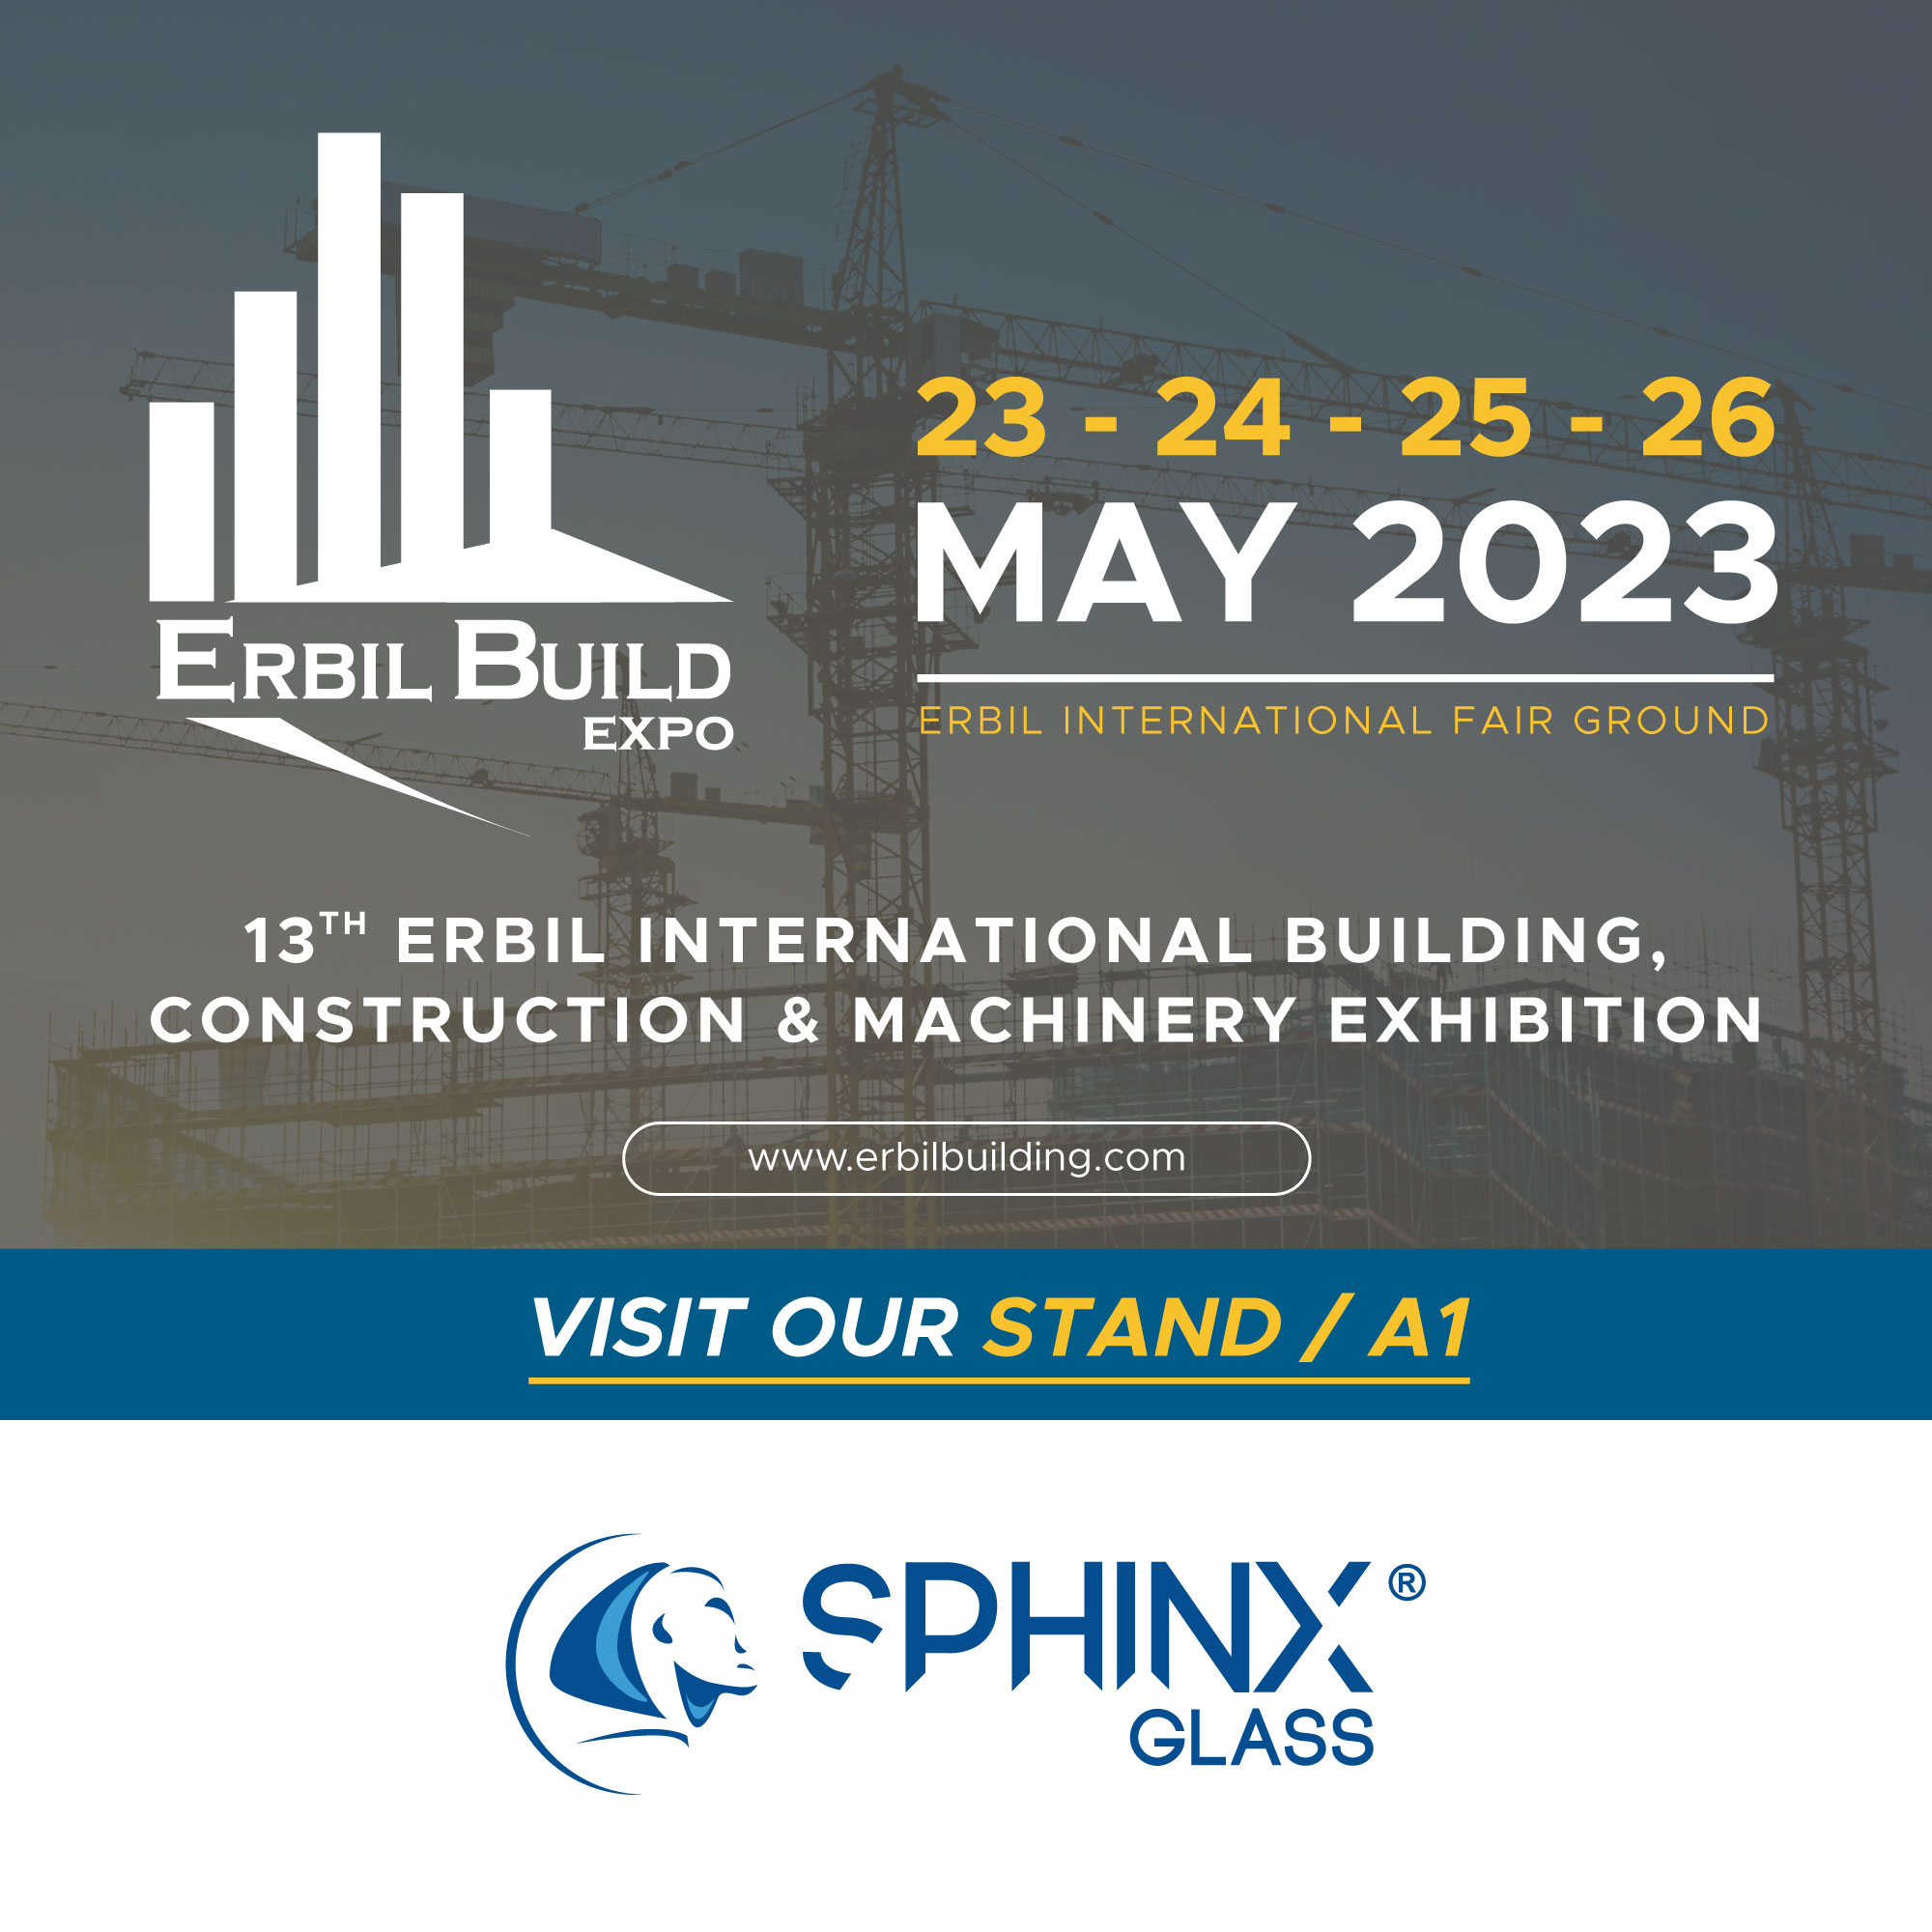 You are currently viewing Sphinx glass participated in Erbil Build Expo 2023